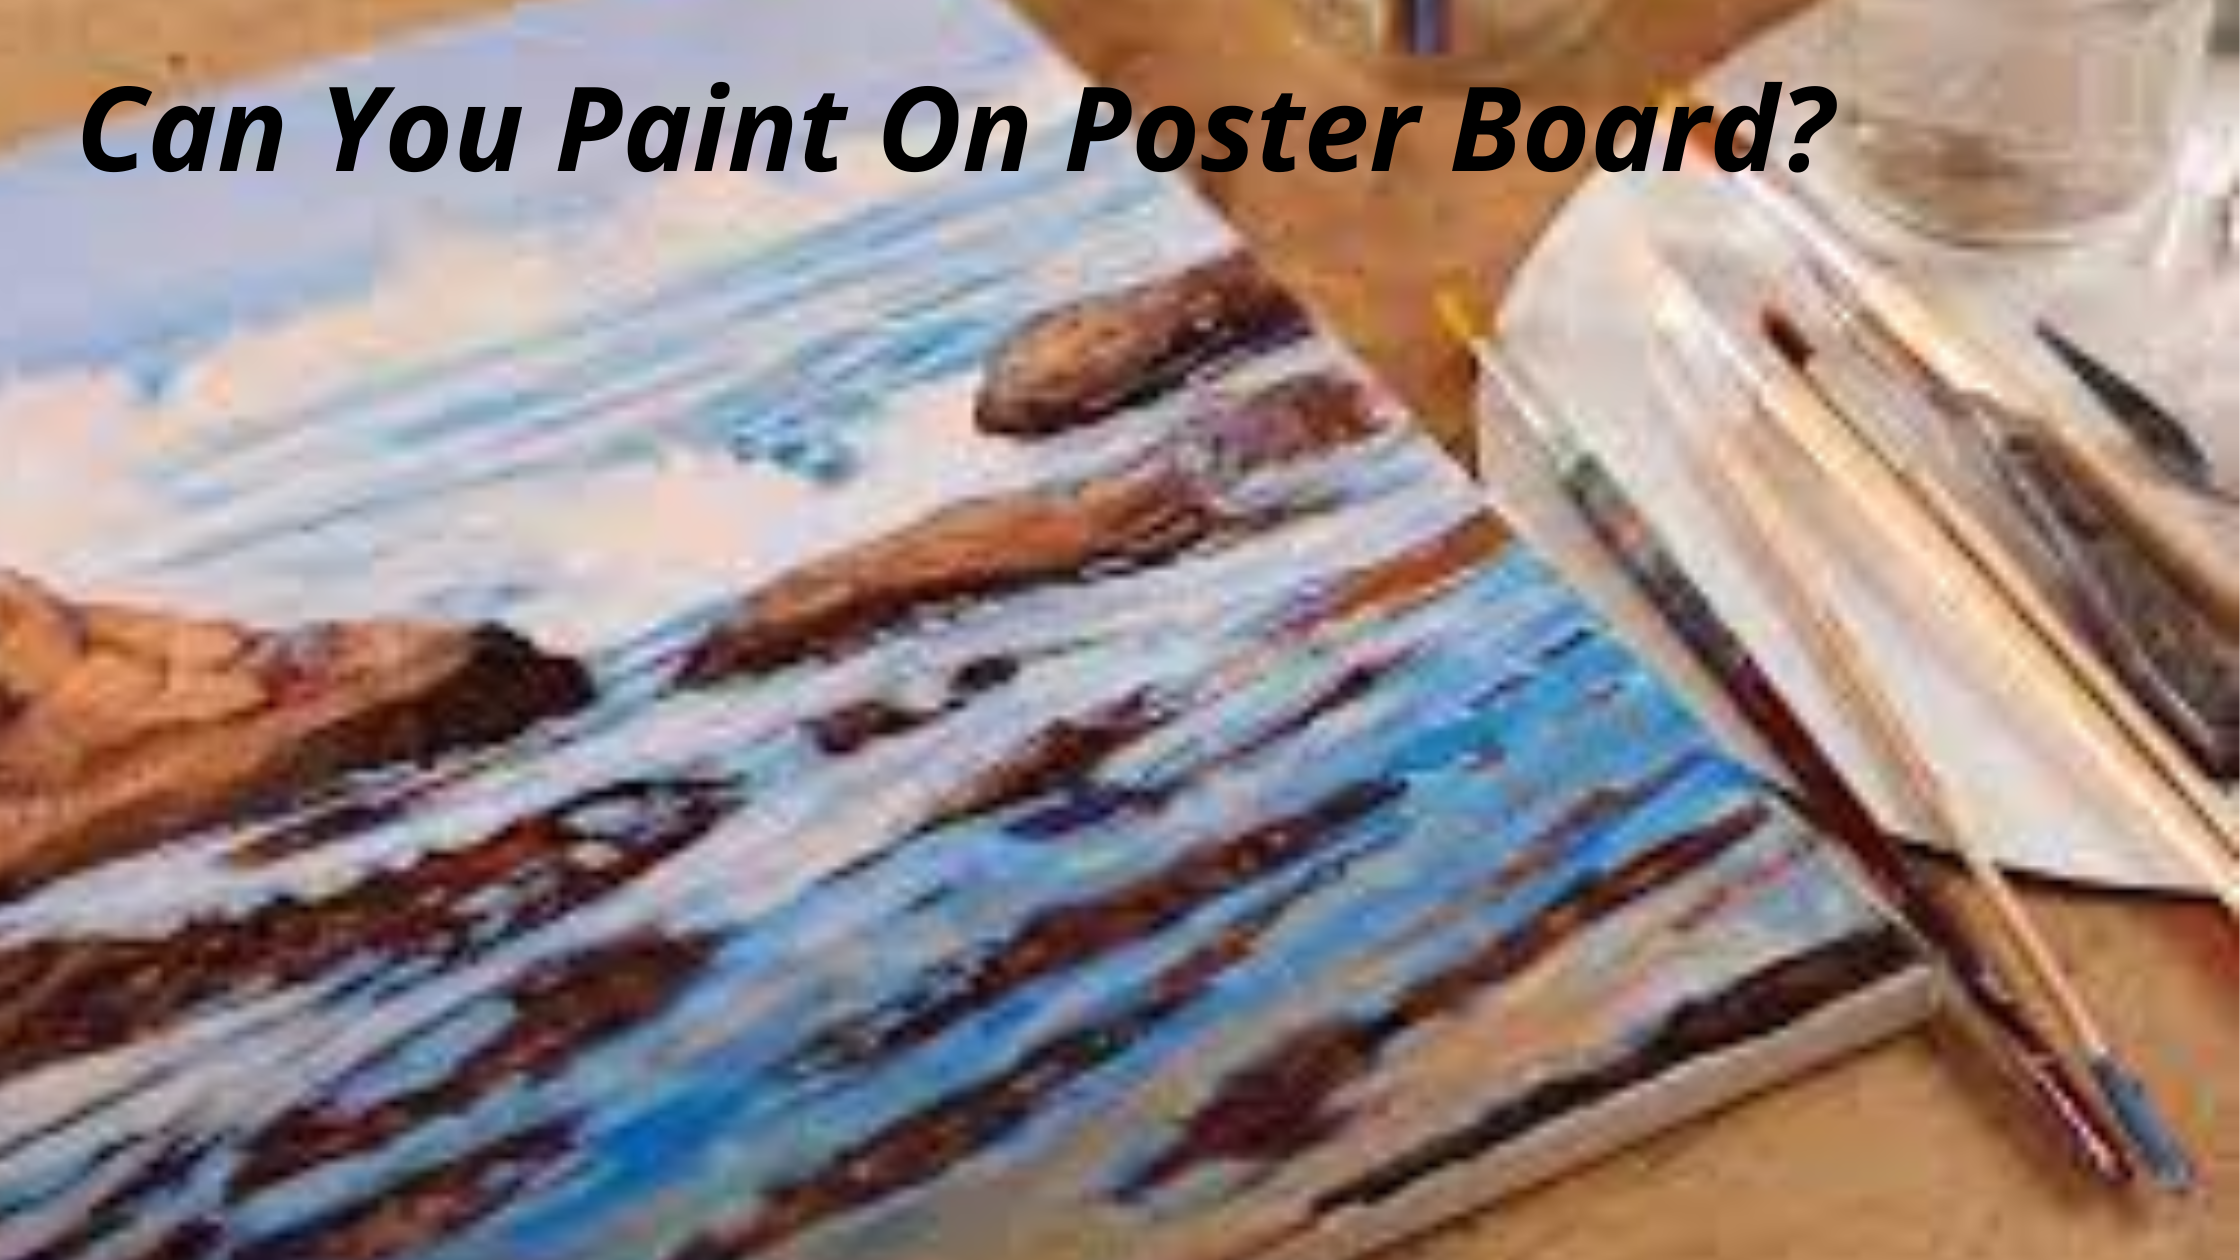 Can You Paint On Poster Board?